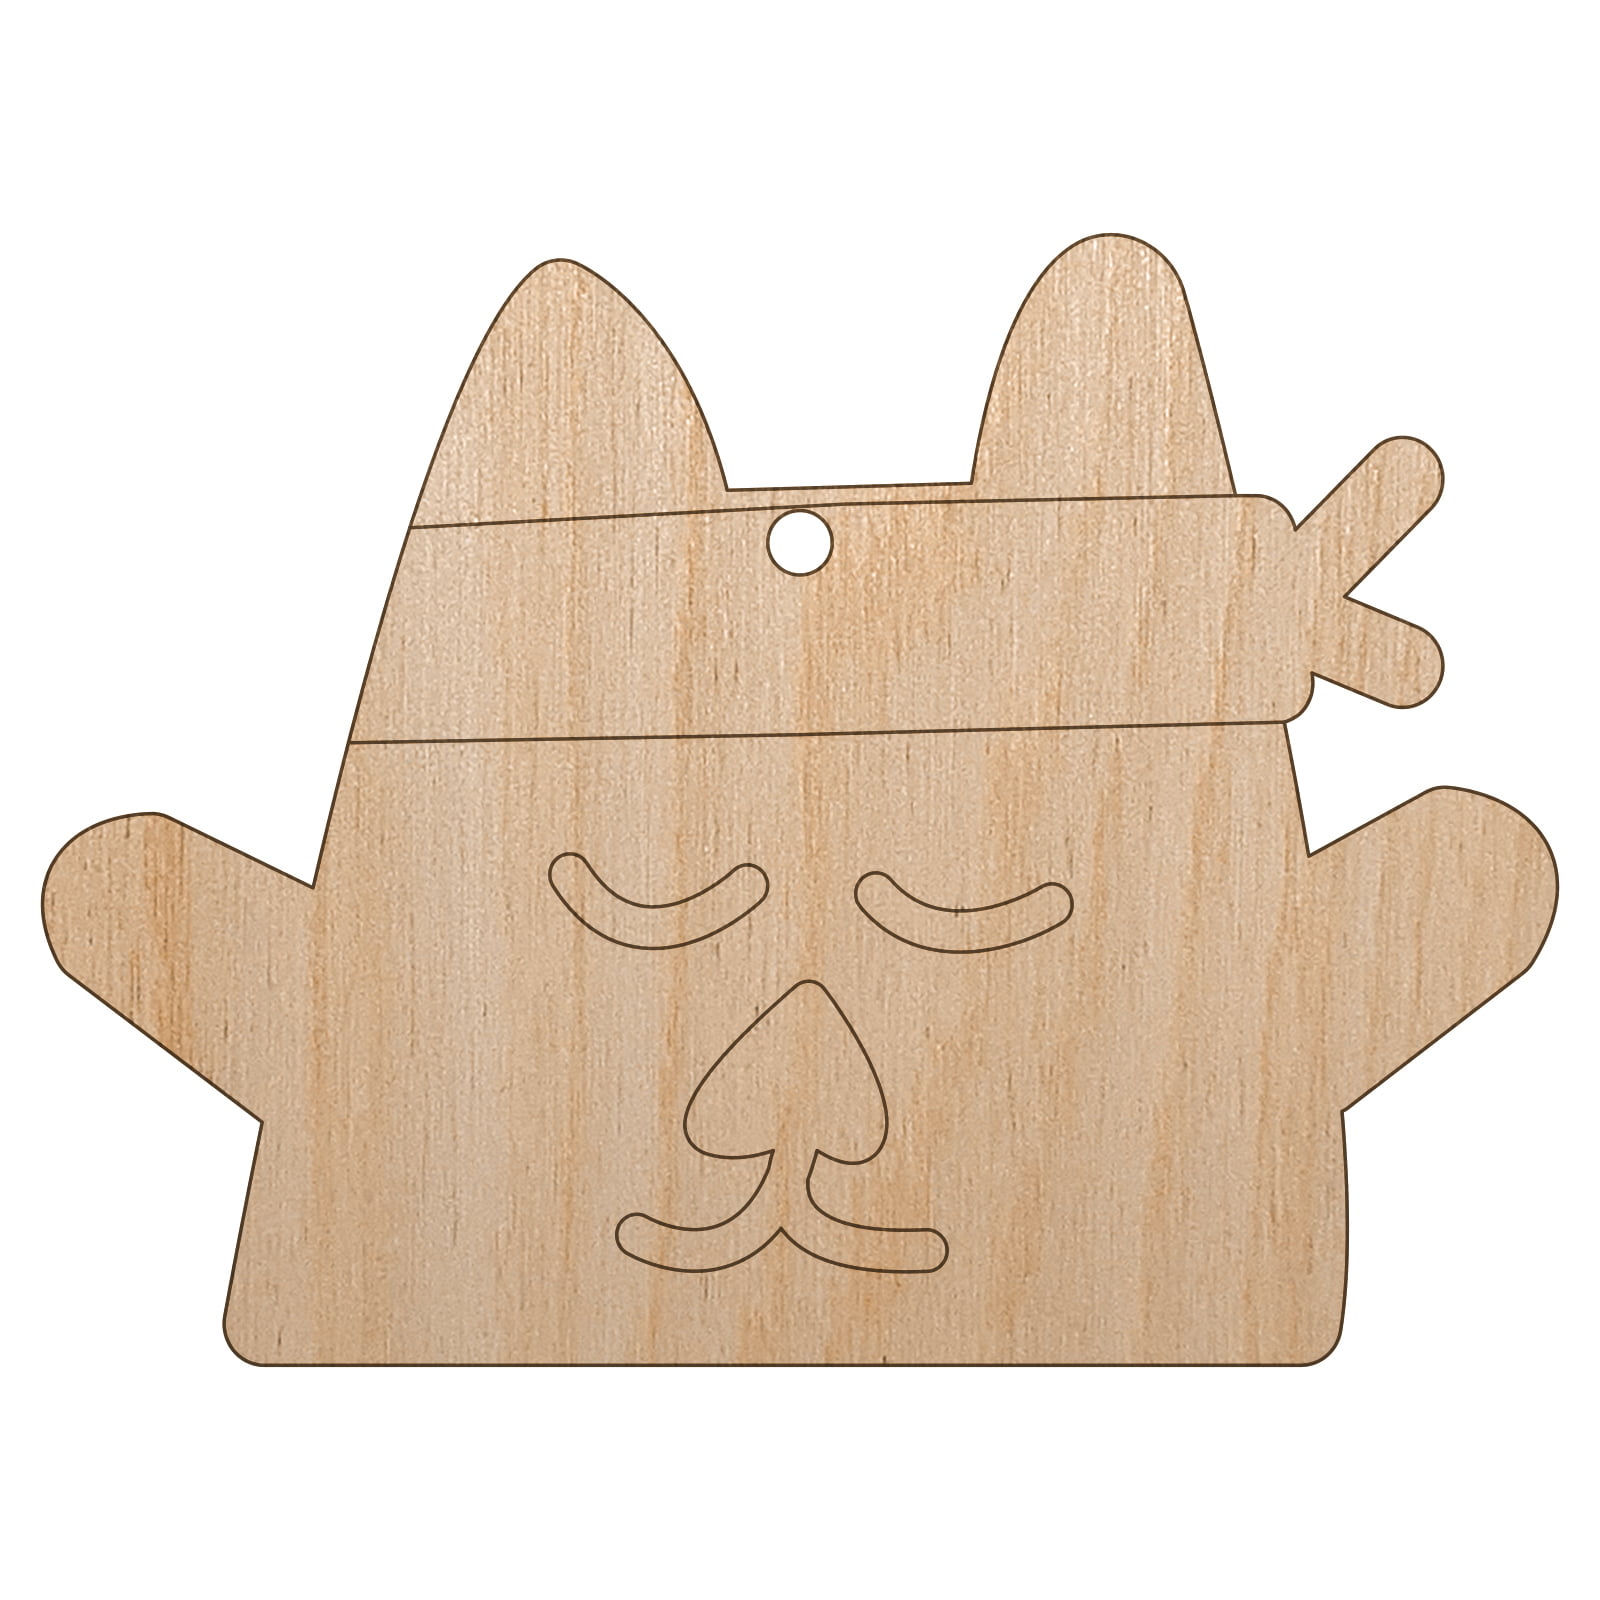 Ninja Kitty Cat Doodle Wood Holiday Christmas Tree Ornament Unfinished DIY Pre-Drilled Craft